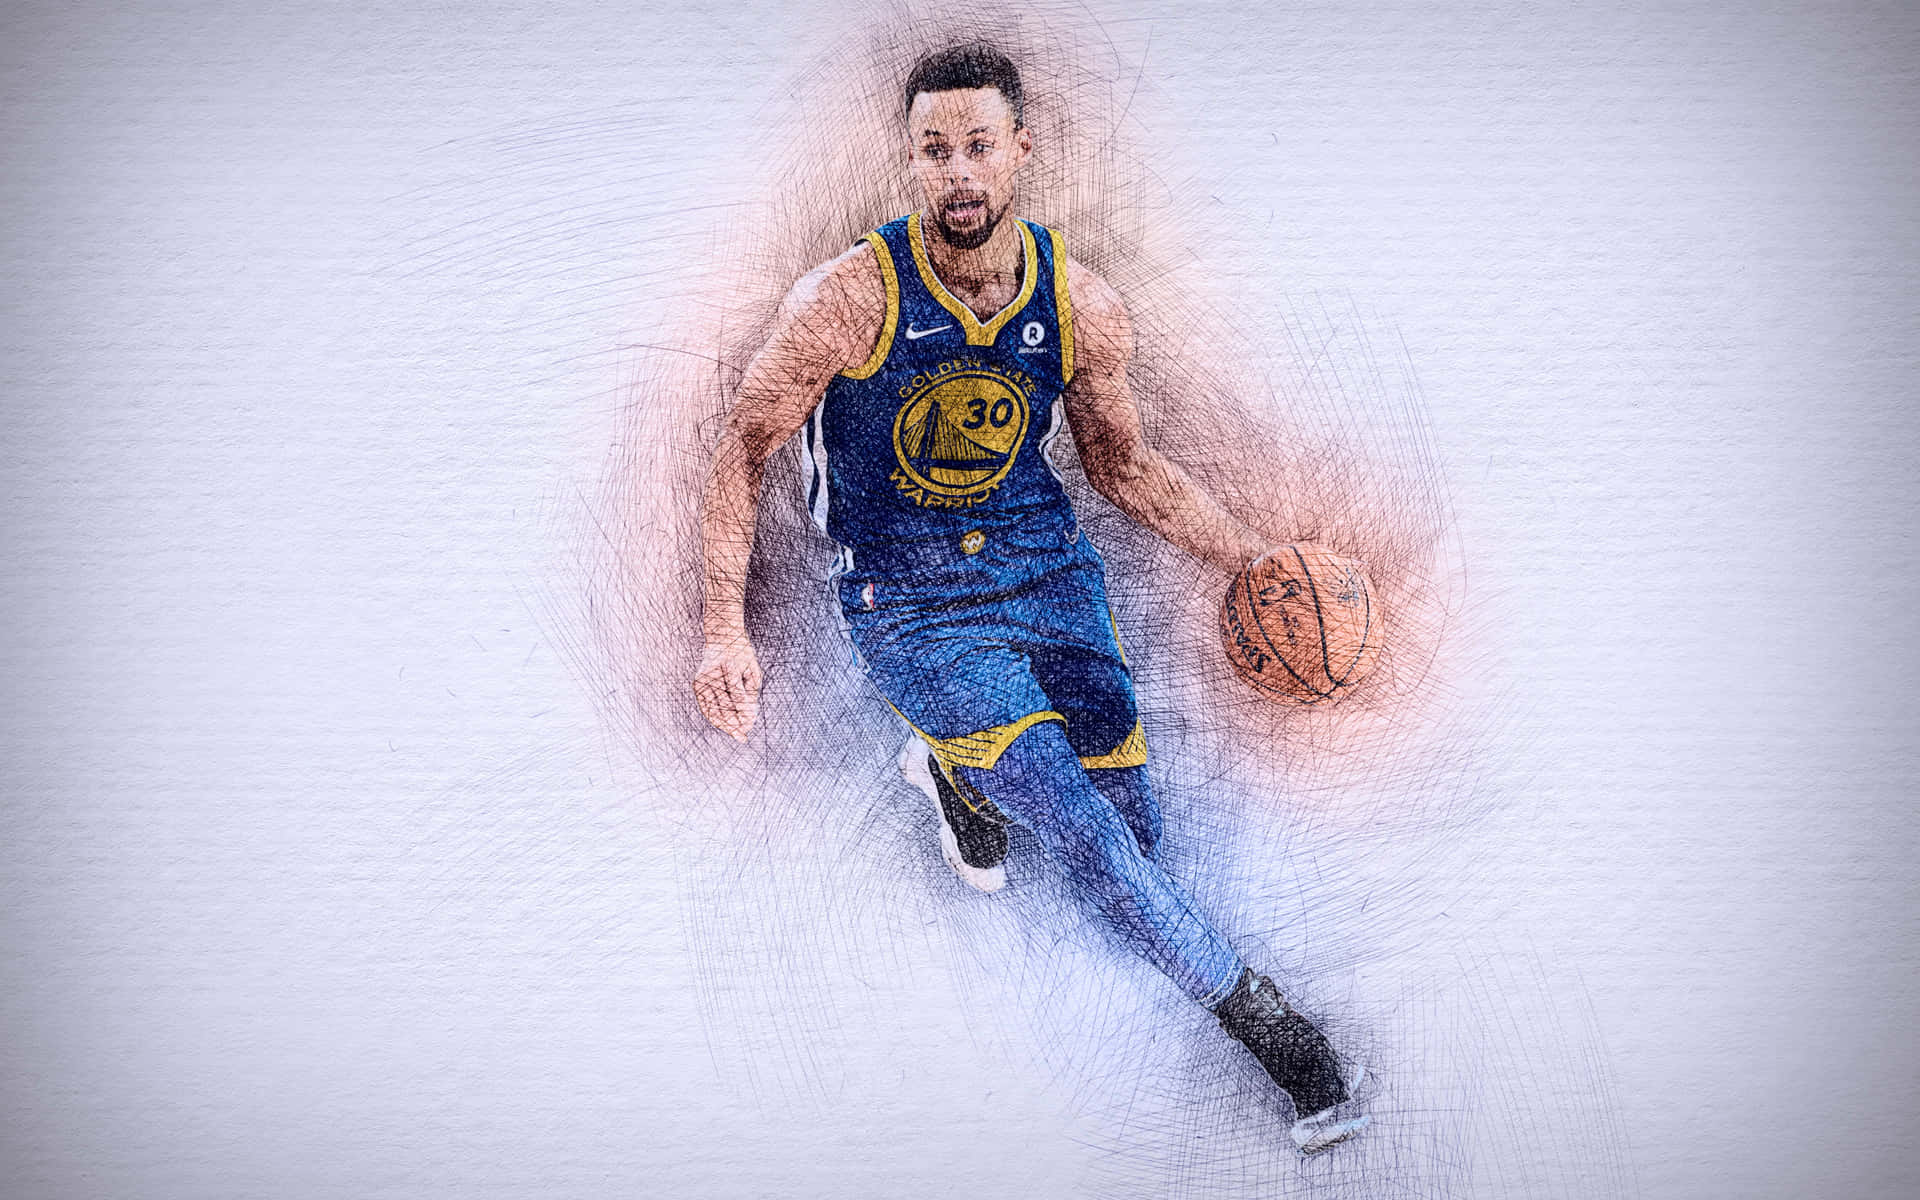 "The incomparable Steph Curry"